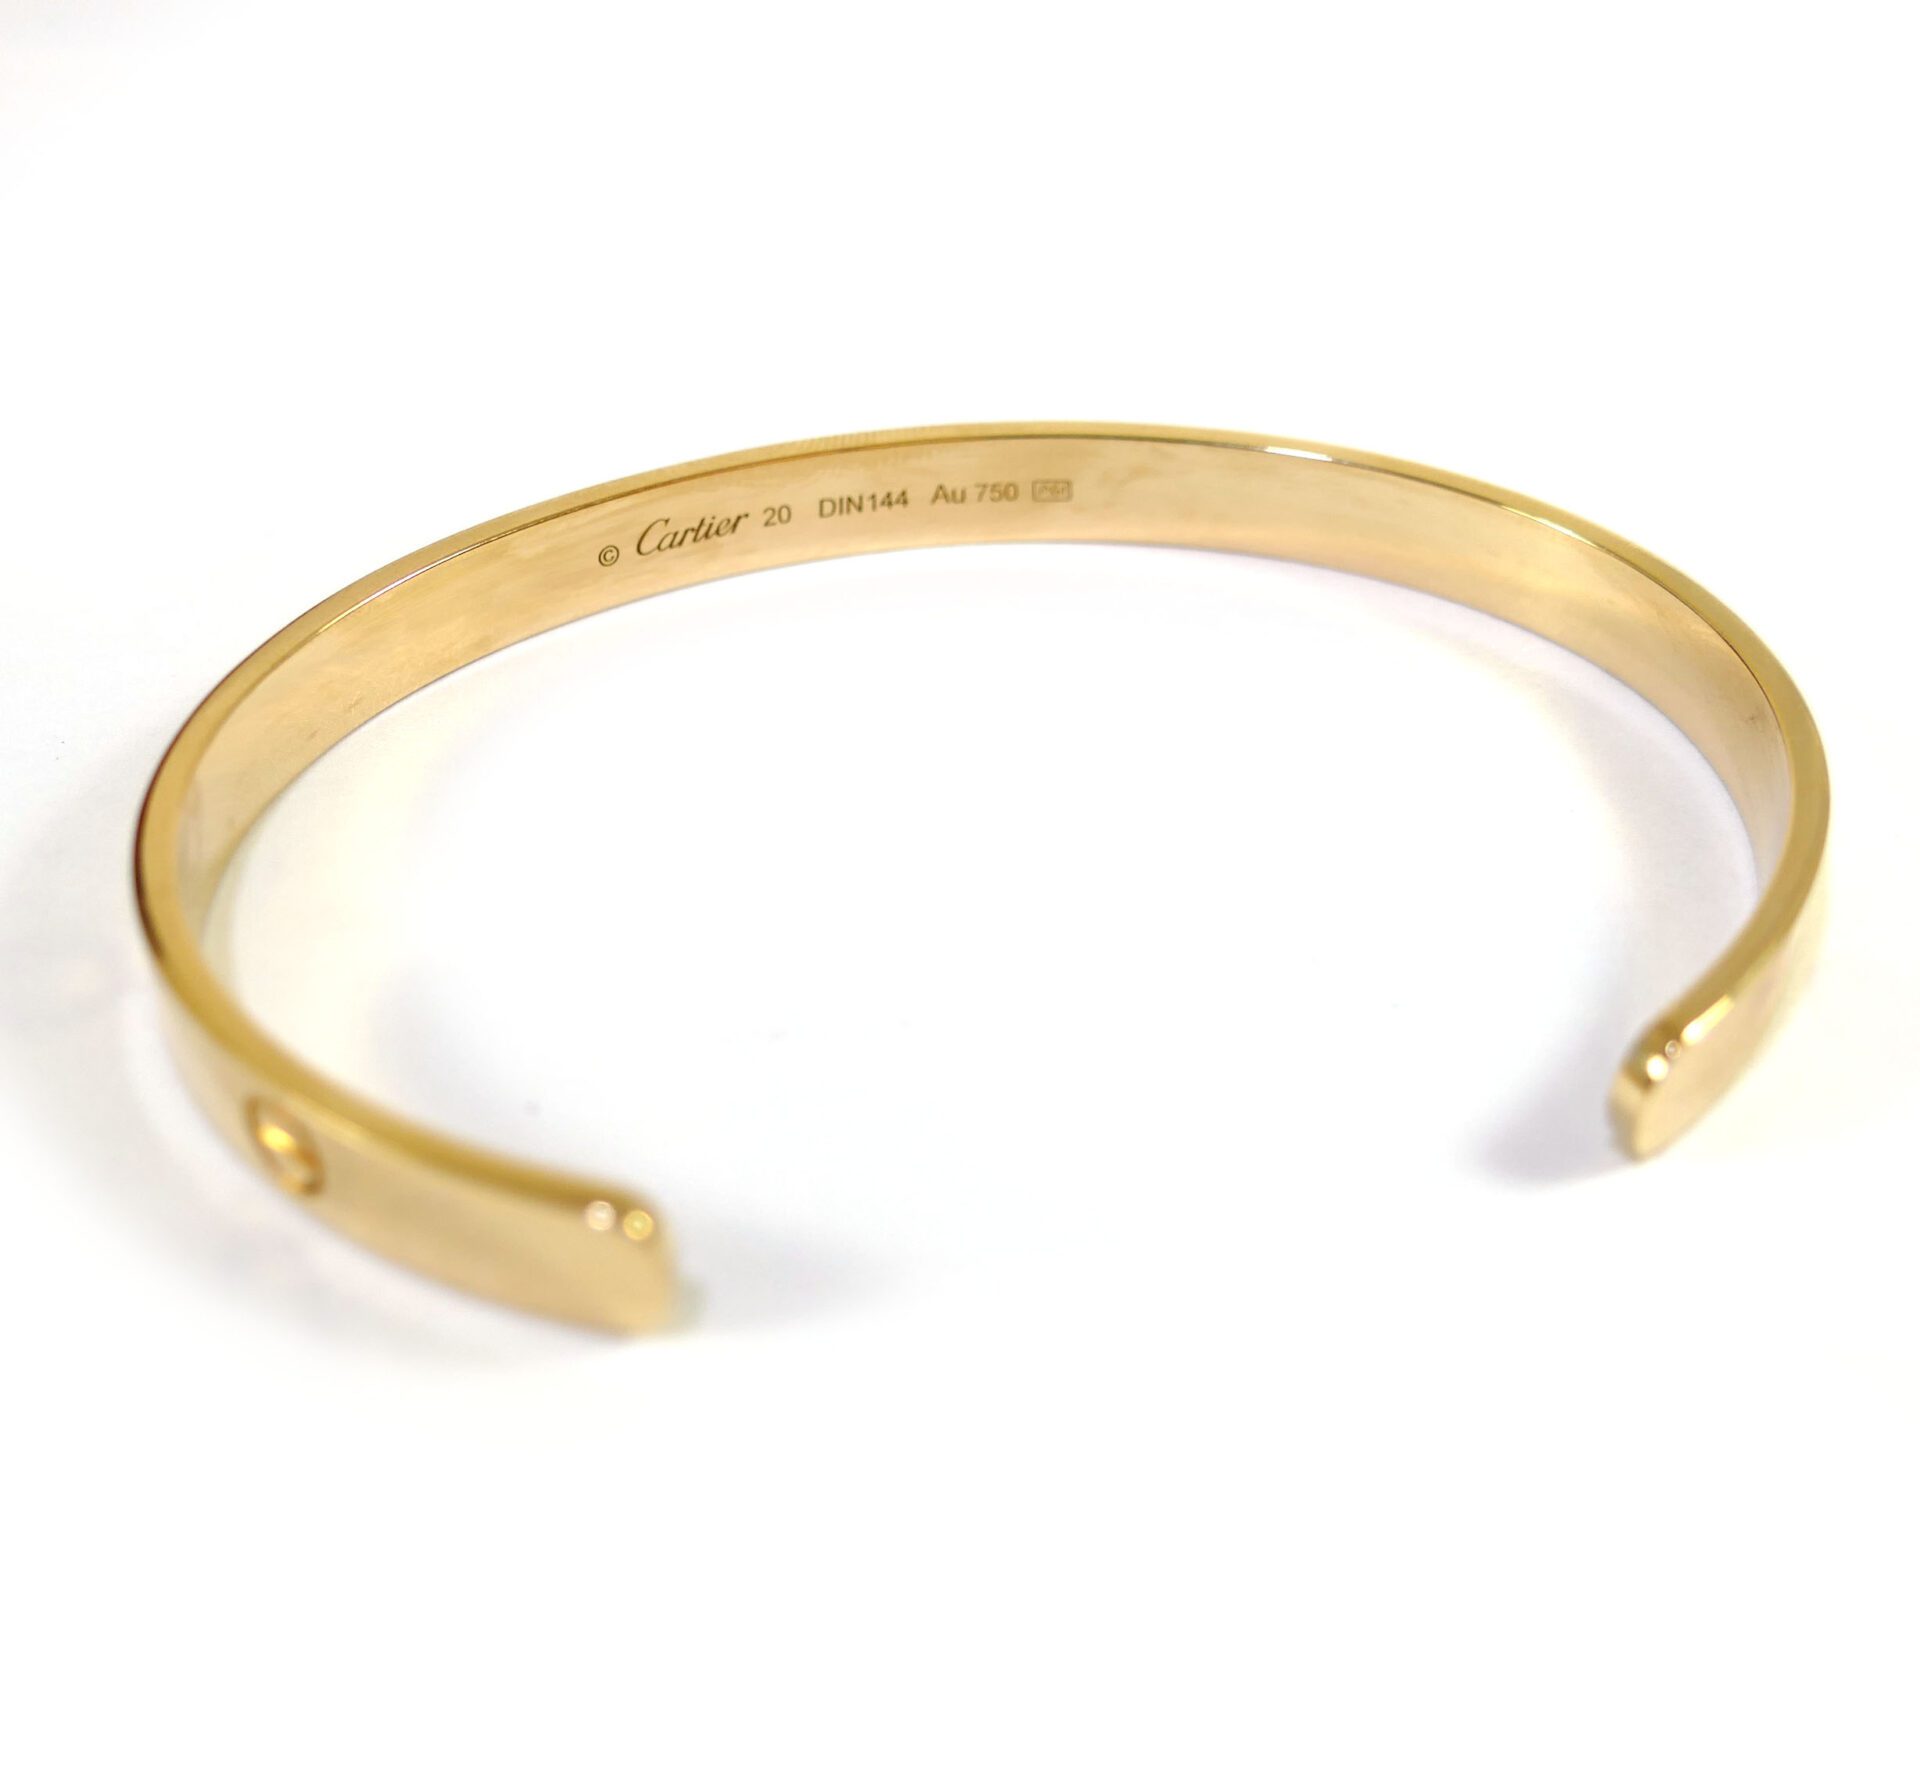 2017 Cartier Love Cuff 18k Yellow Gold Bracelet Size 20 w/ Box & Papers